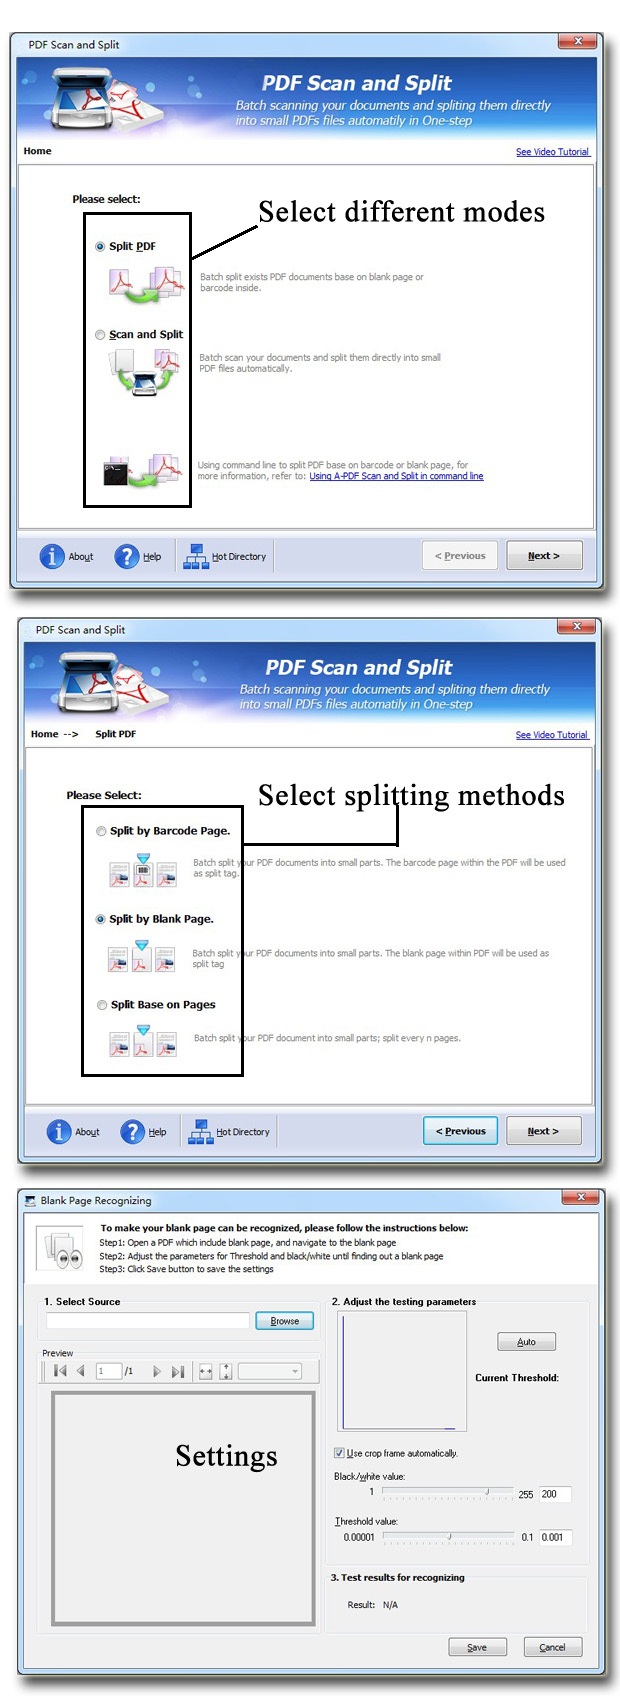 wise-pdf-scan-and-split-steps